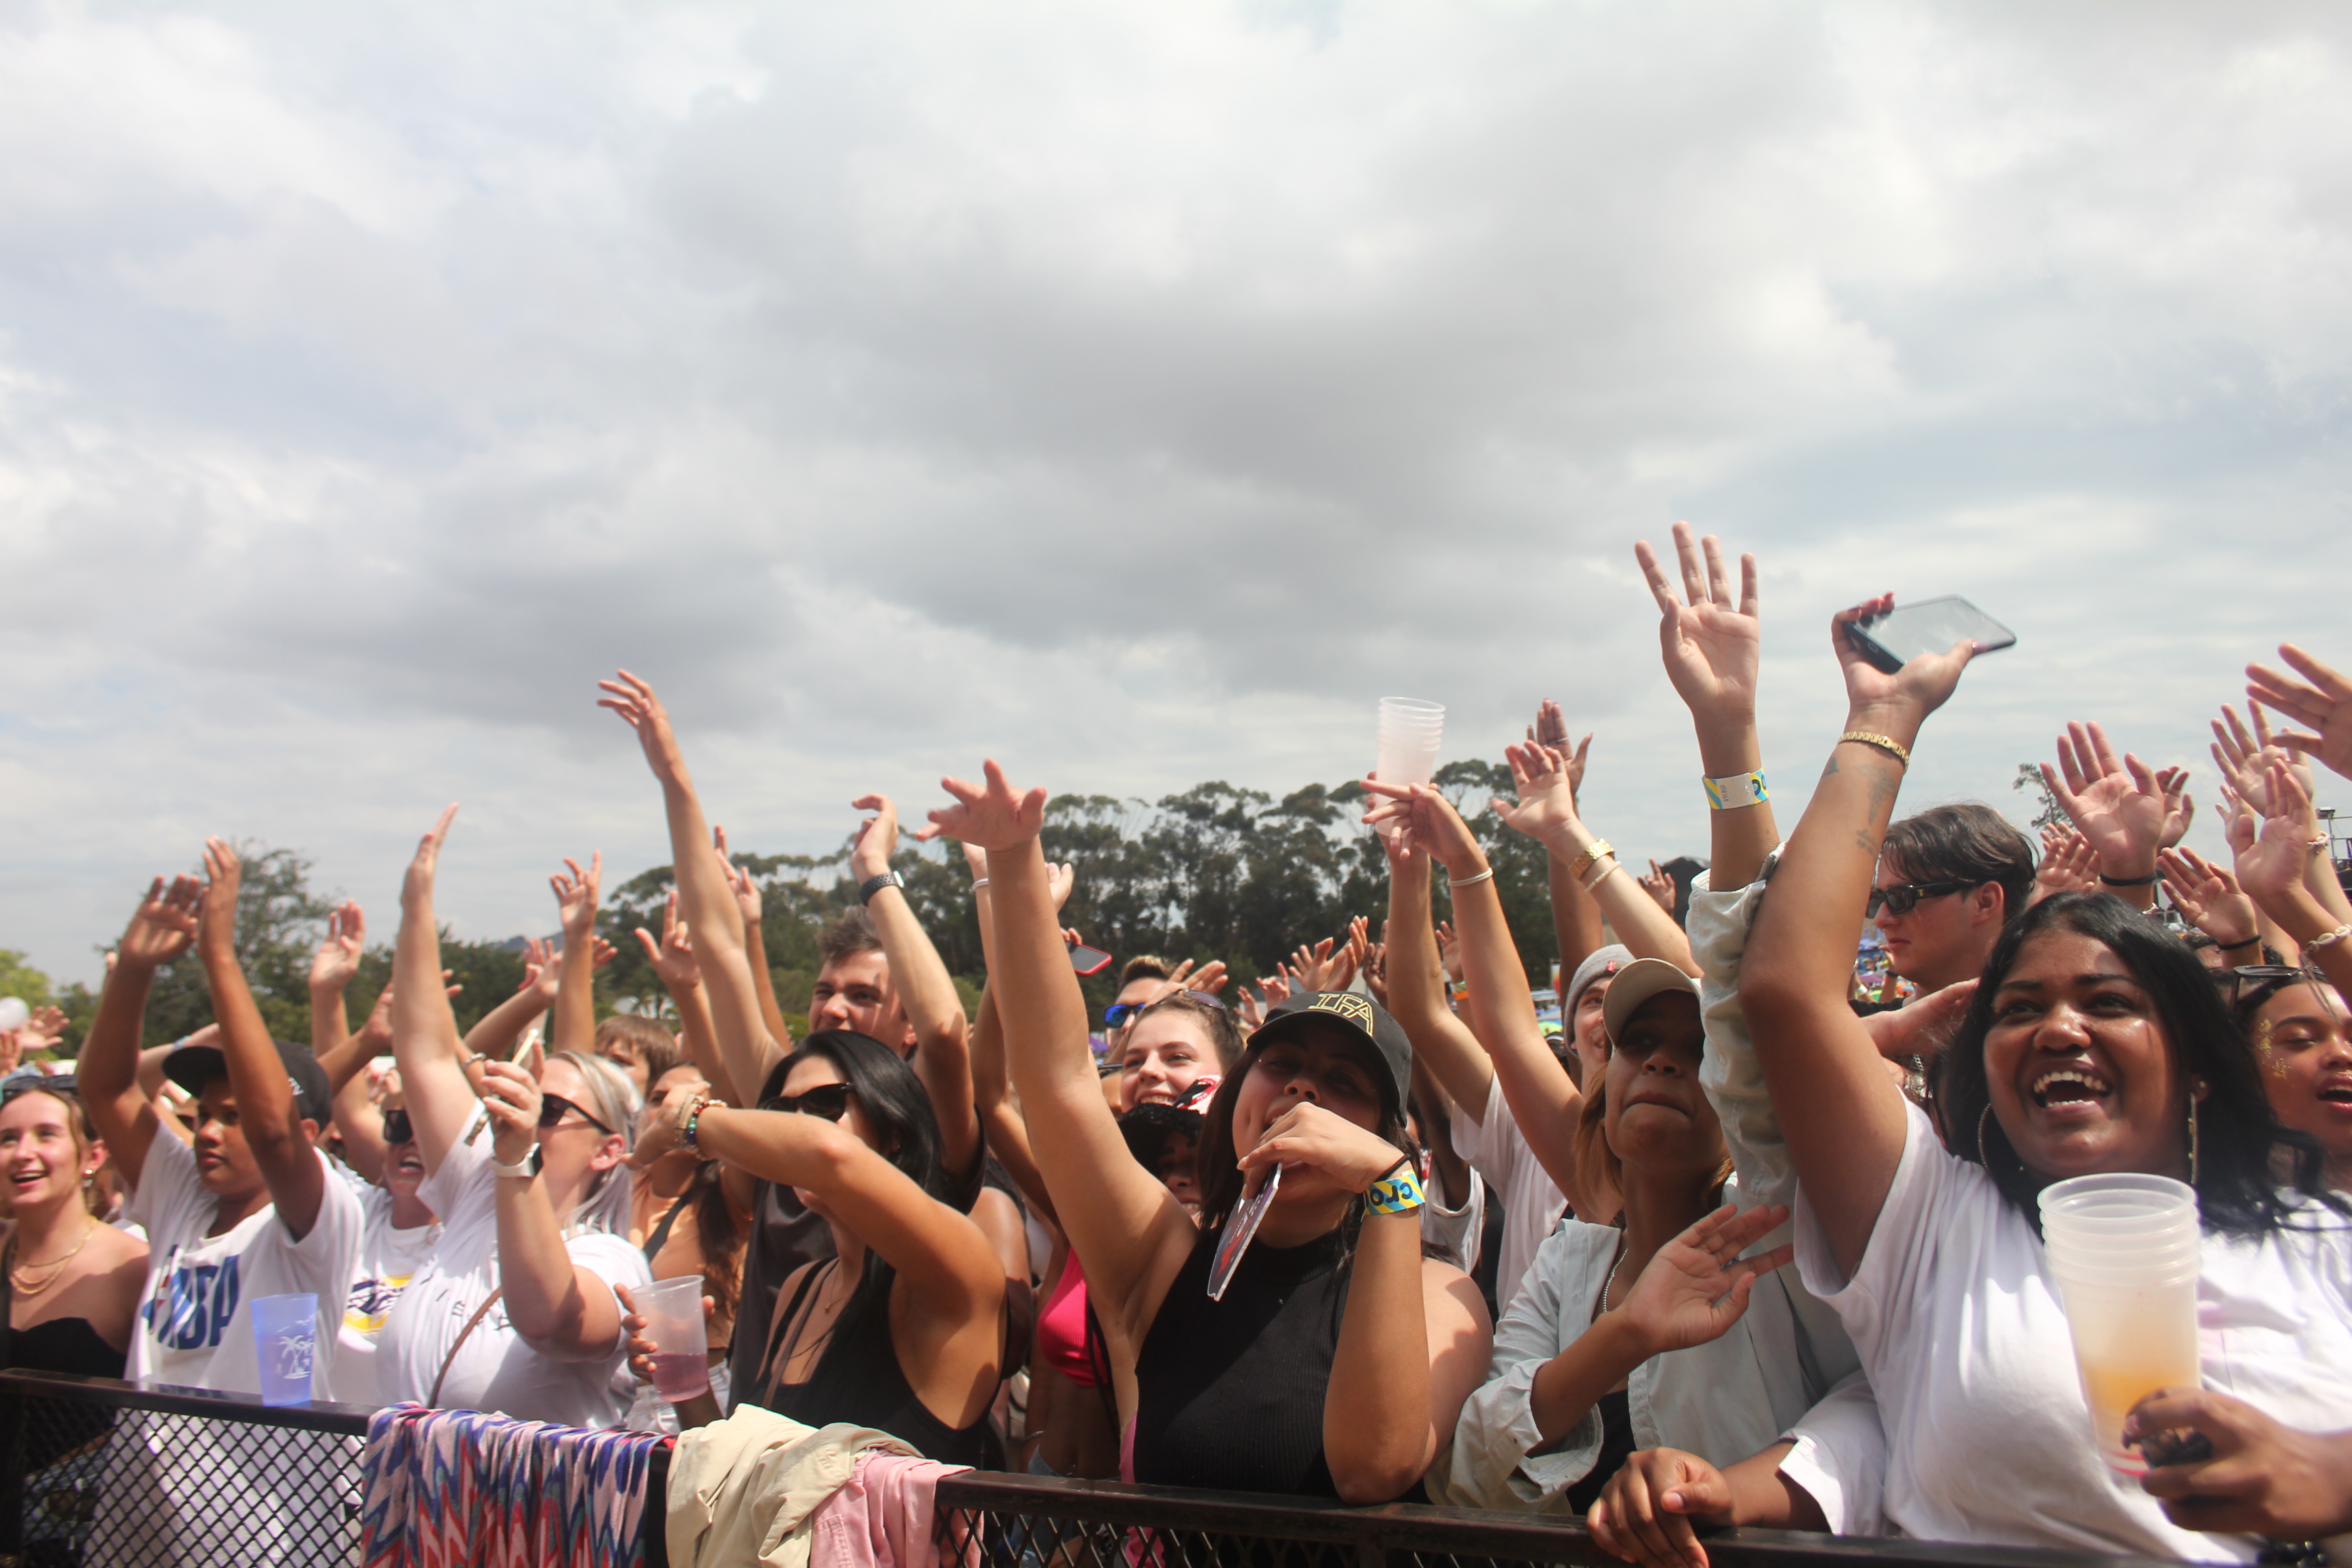 The crowd during Emo Adams' performance at the Galaxy KDay Festival. Image: An Wentzel